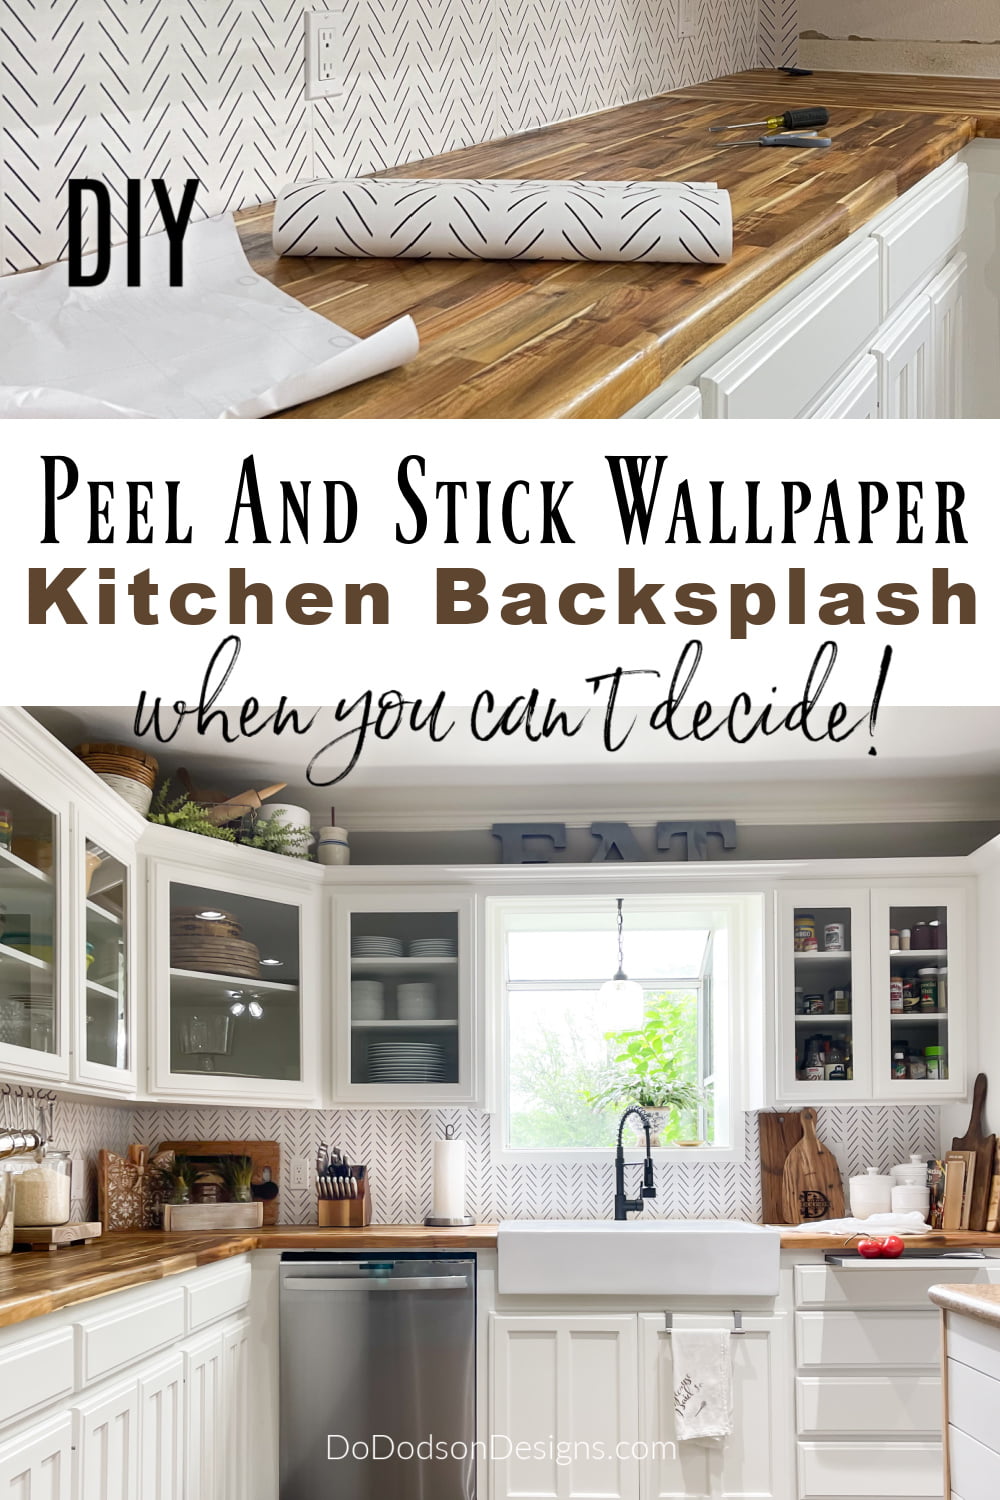 Peel And Stick Wallpaper Backsplash - When you can\'t decide!